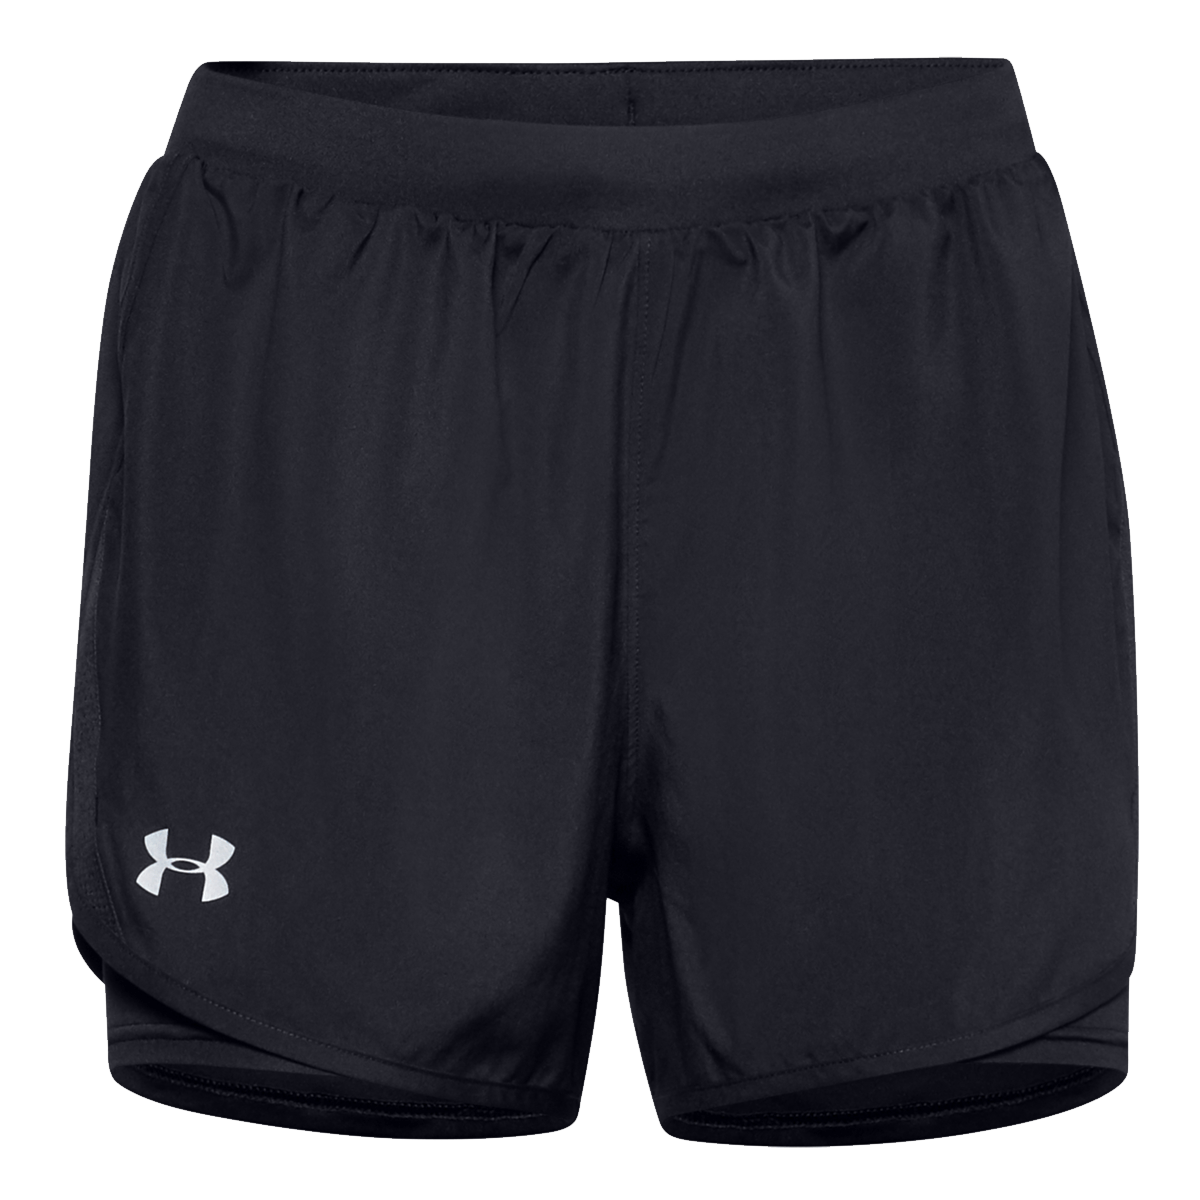 UA Fly By 2.0 2N1 Short UNDER ARMOUR sportvision.ro imagine noua 2022